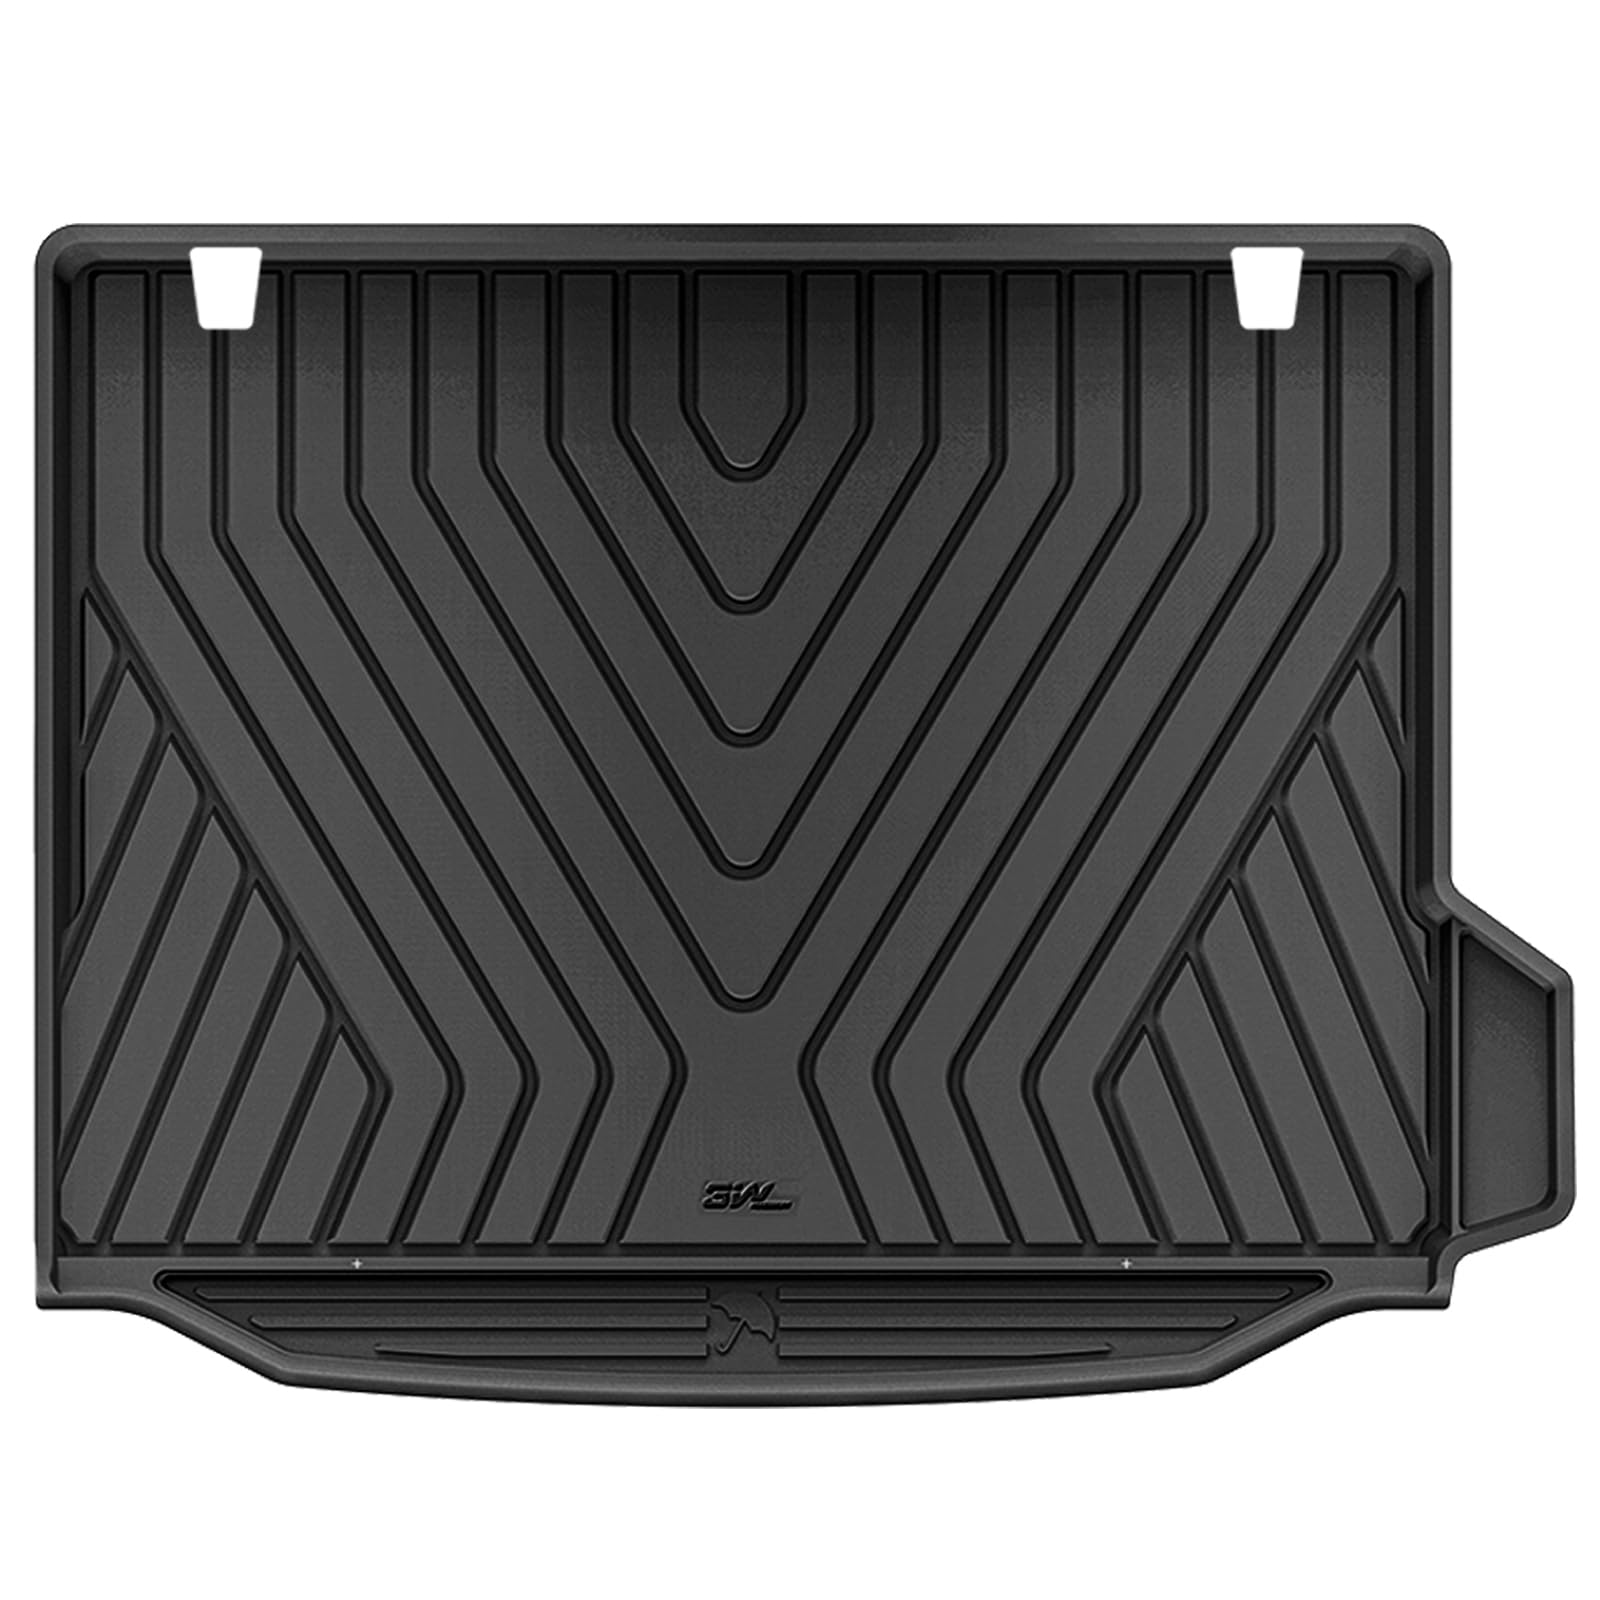 3W BMW X3 30i X3 M40i X3 30e X3 M 2018-2024 Floor Mats & Cargo Mats TPE Material & All-Weather Protection Vehicles & Parts 3W 2018-2024 X3 2018-2024 Trunk Mat